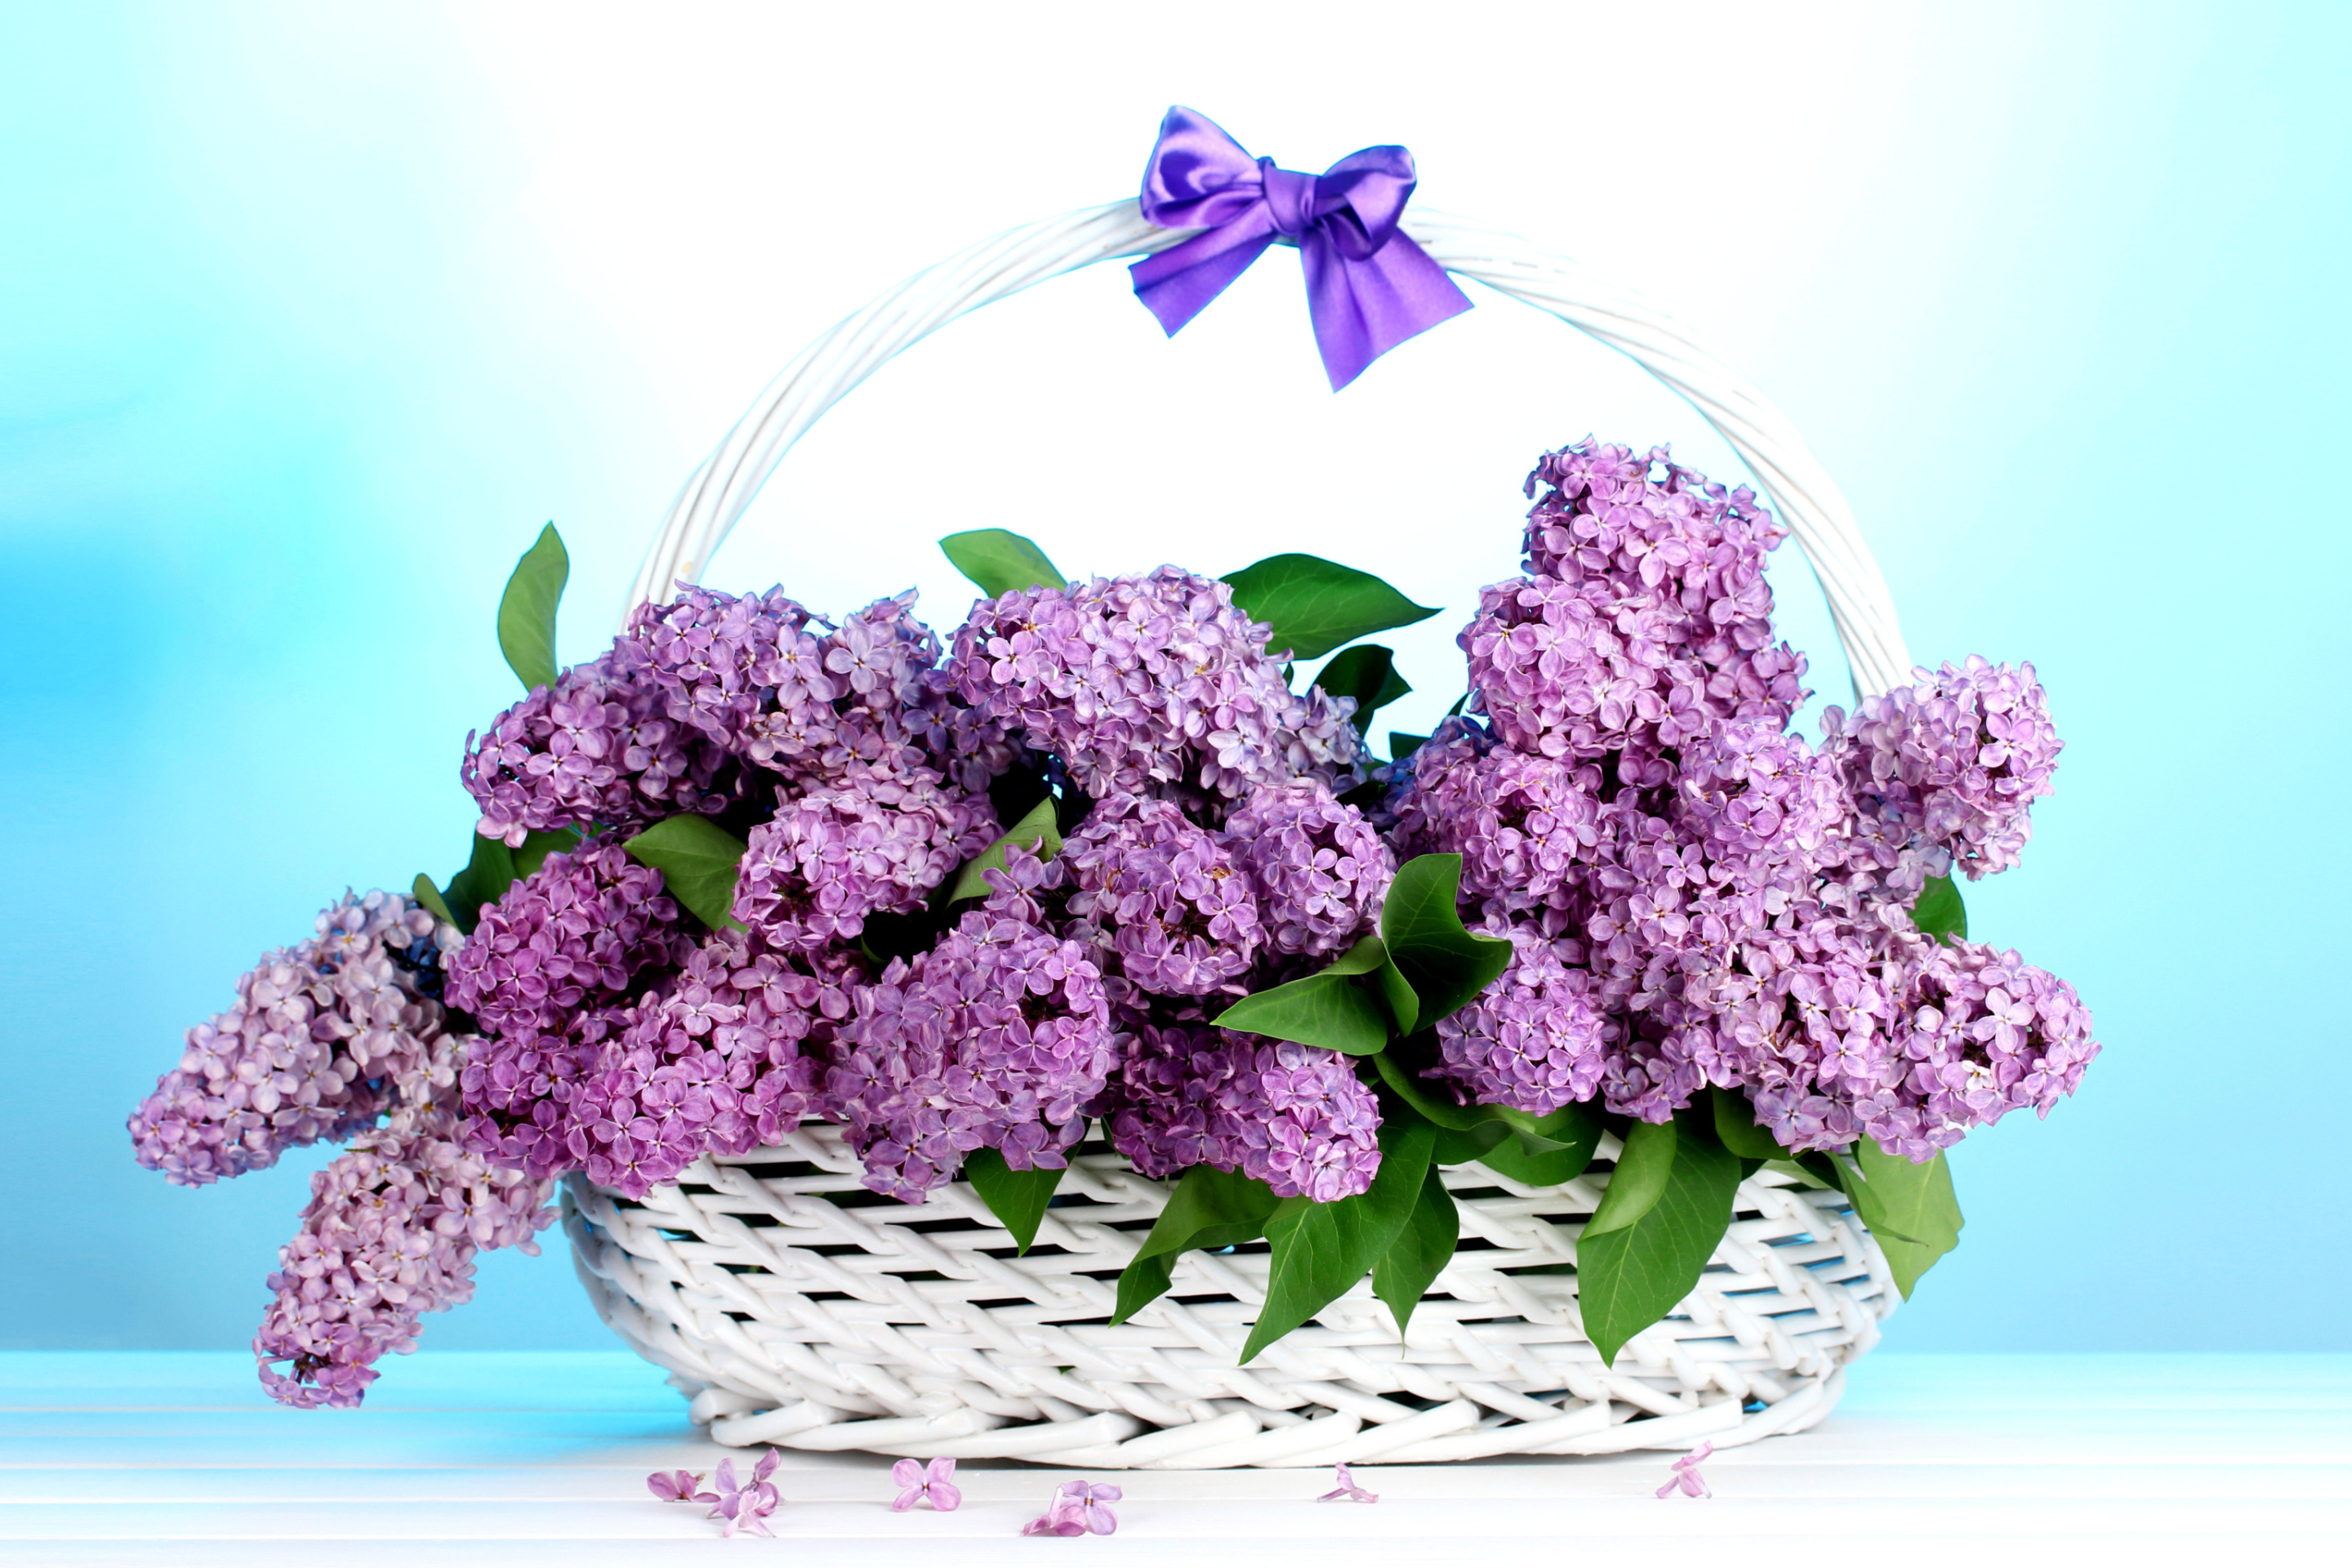 Das Baskets with lilac flowers Wallpaper 2880x1920